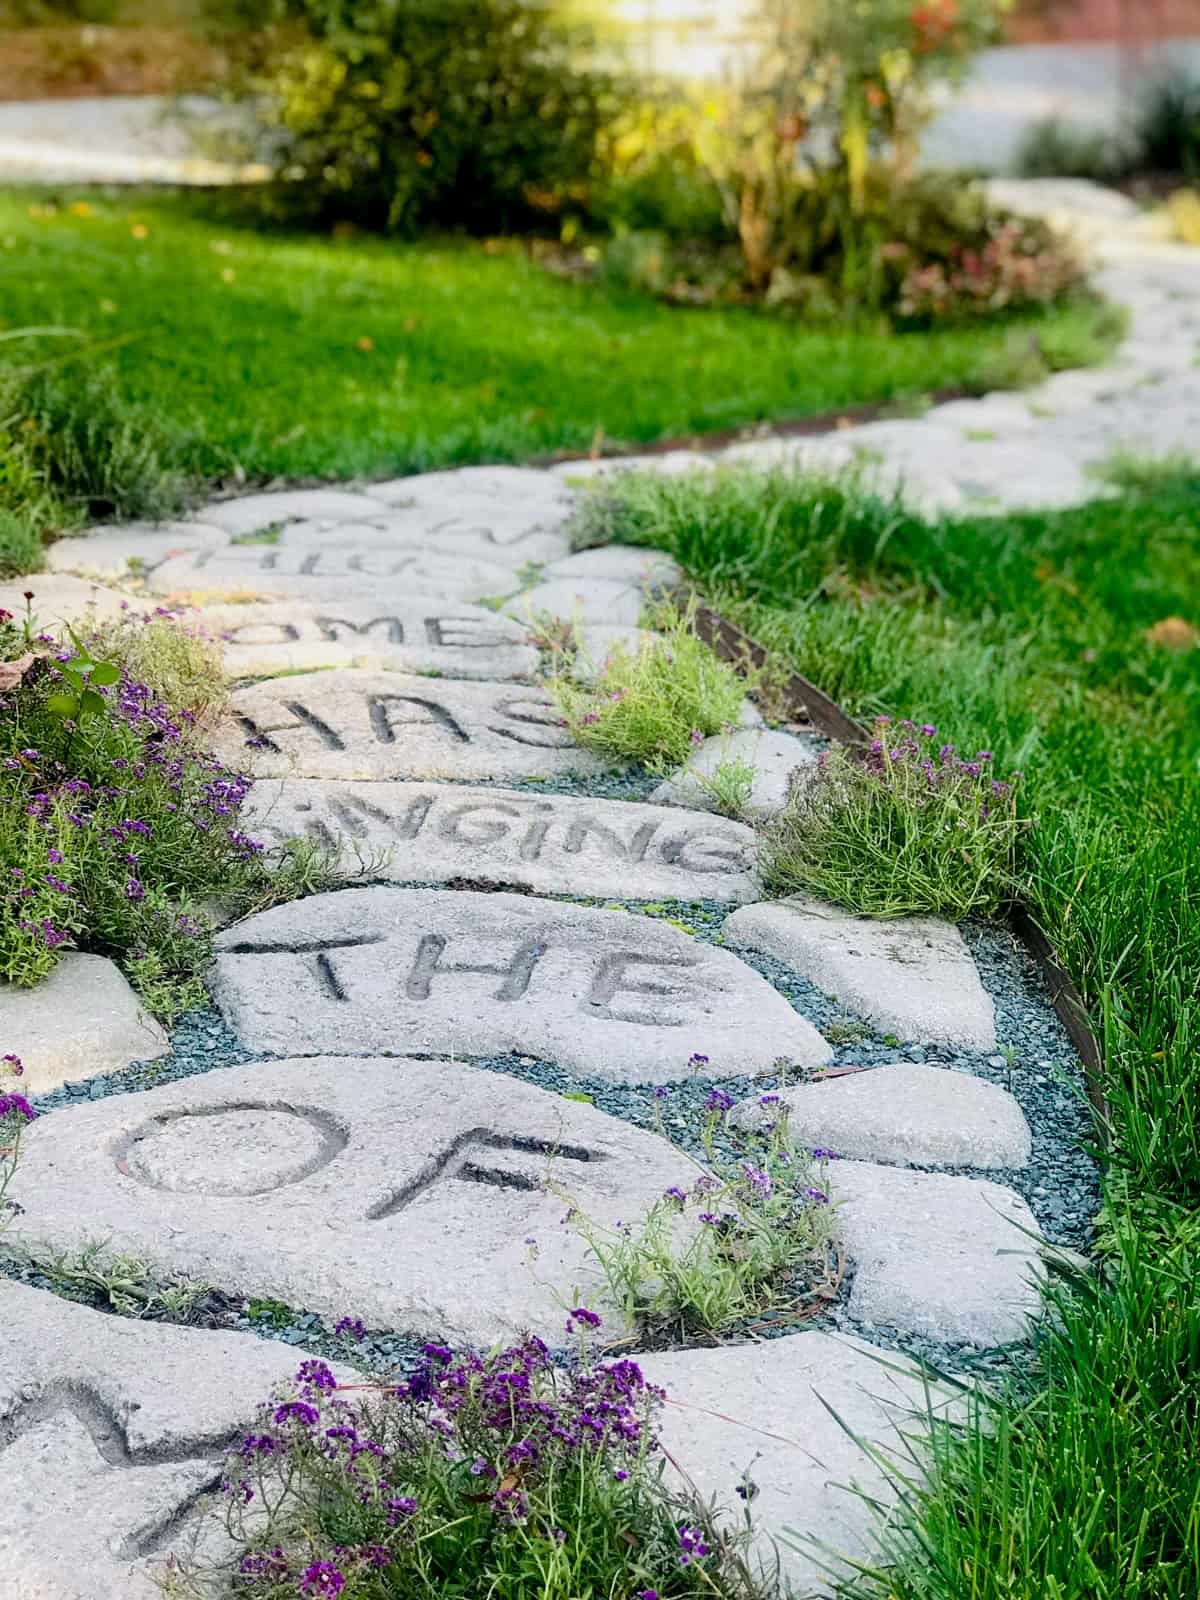 the original concrete walkway that I saw at my friend's house 